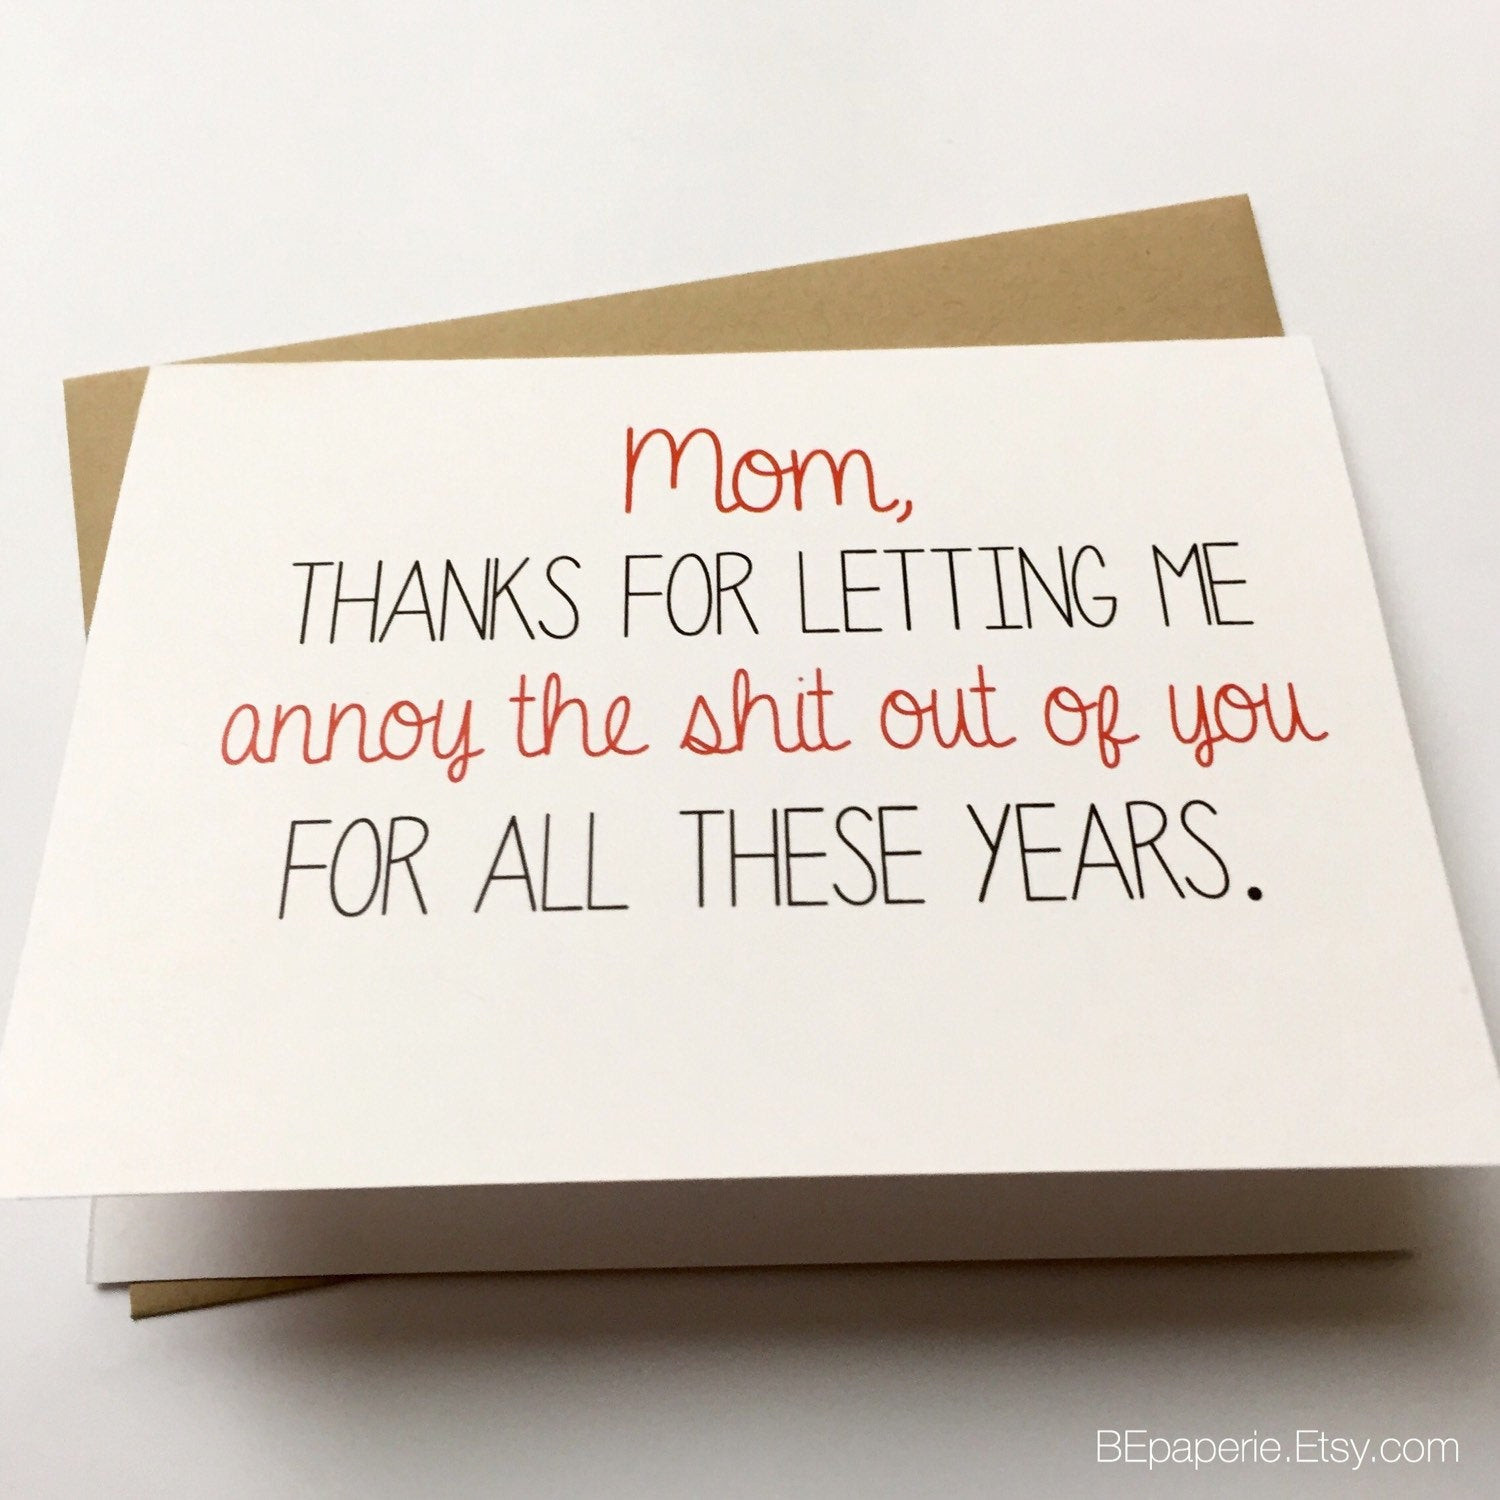 Funny Mom Birthday Cards
 Funny Mom Card Mother s Day Card Mom Birthday Card